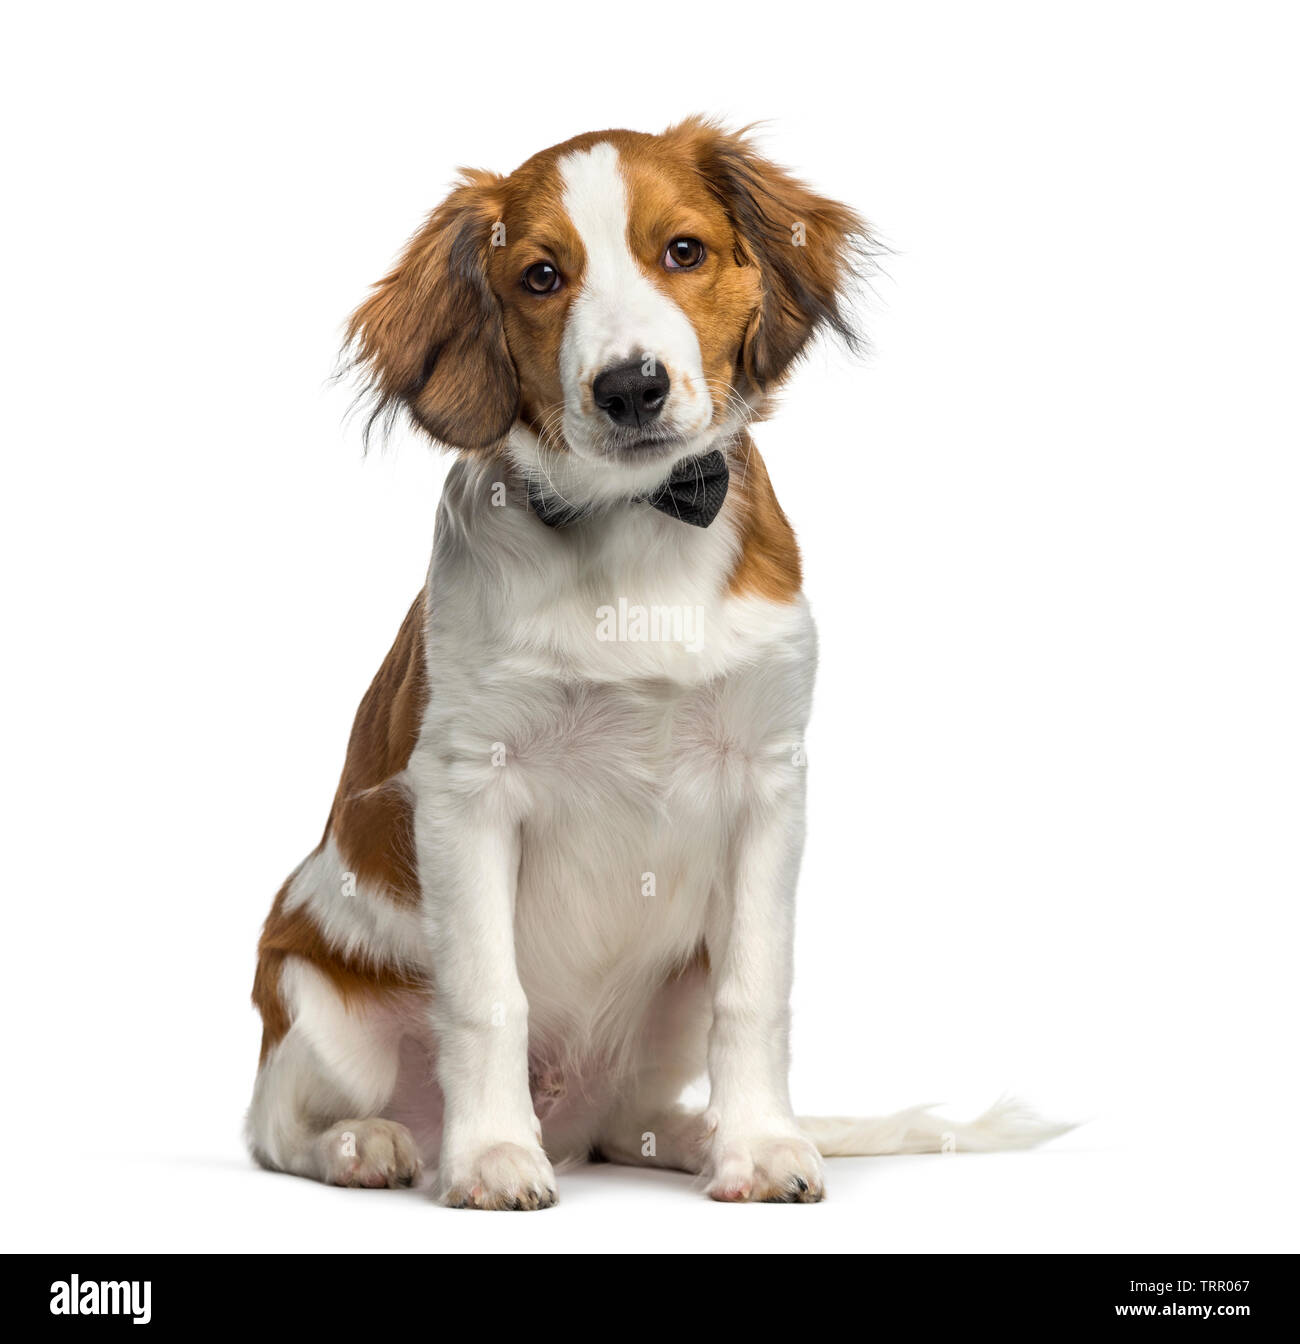 Kooikerhondje, 4 months old, sitting in front of white background Stock Photo